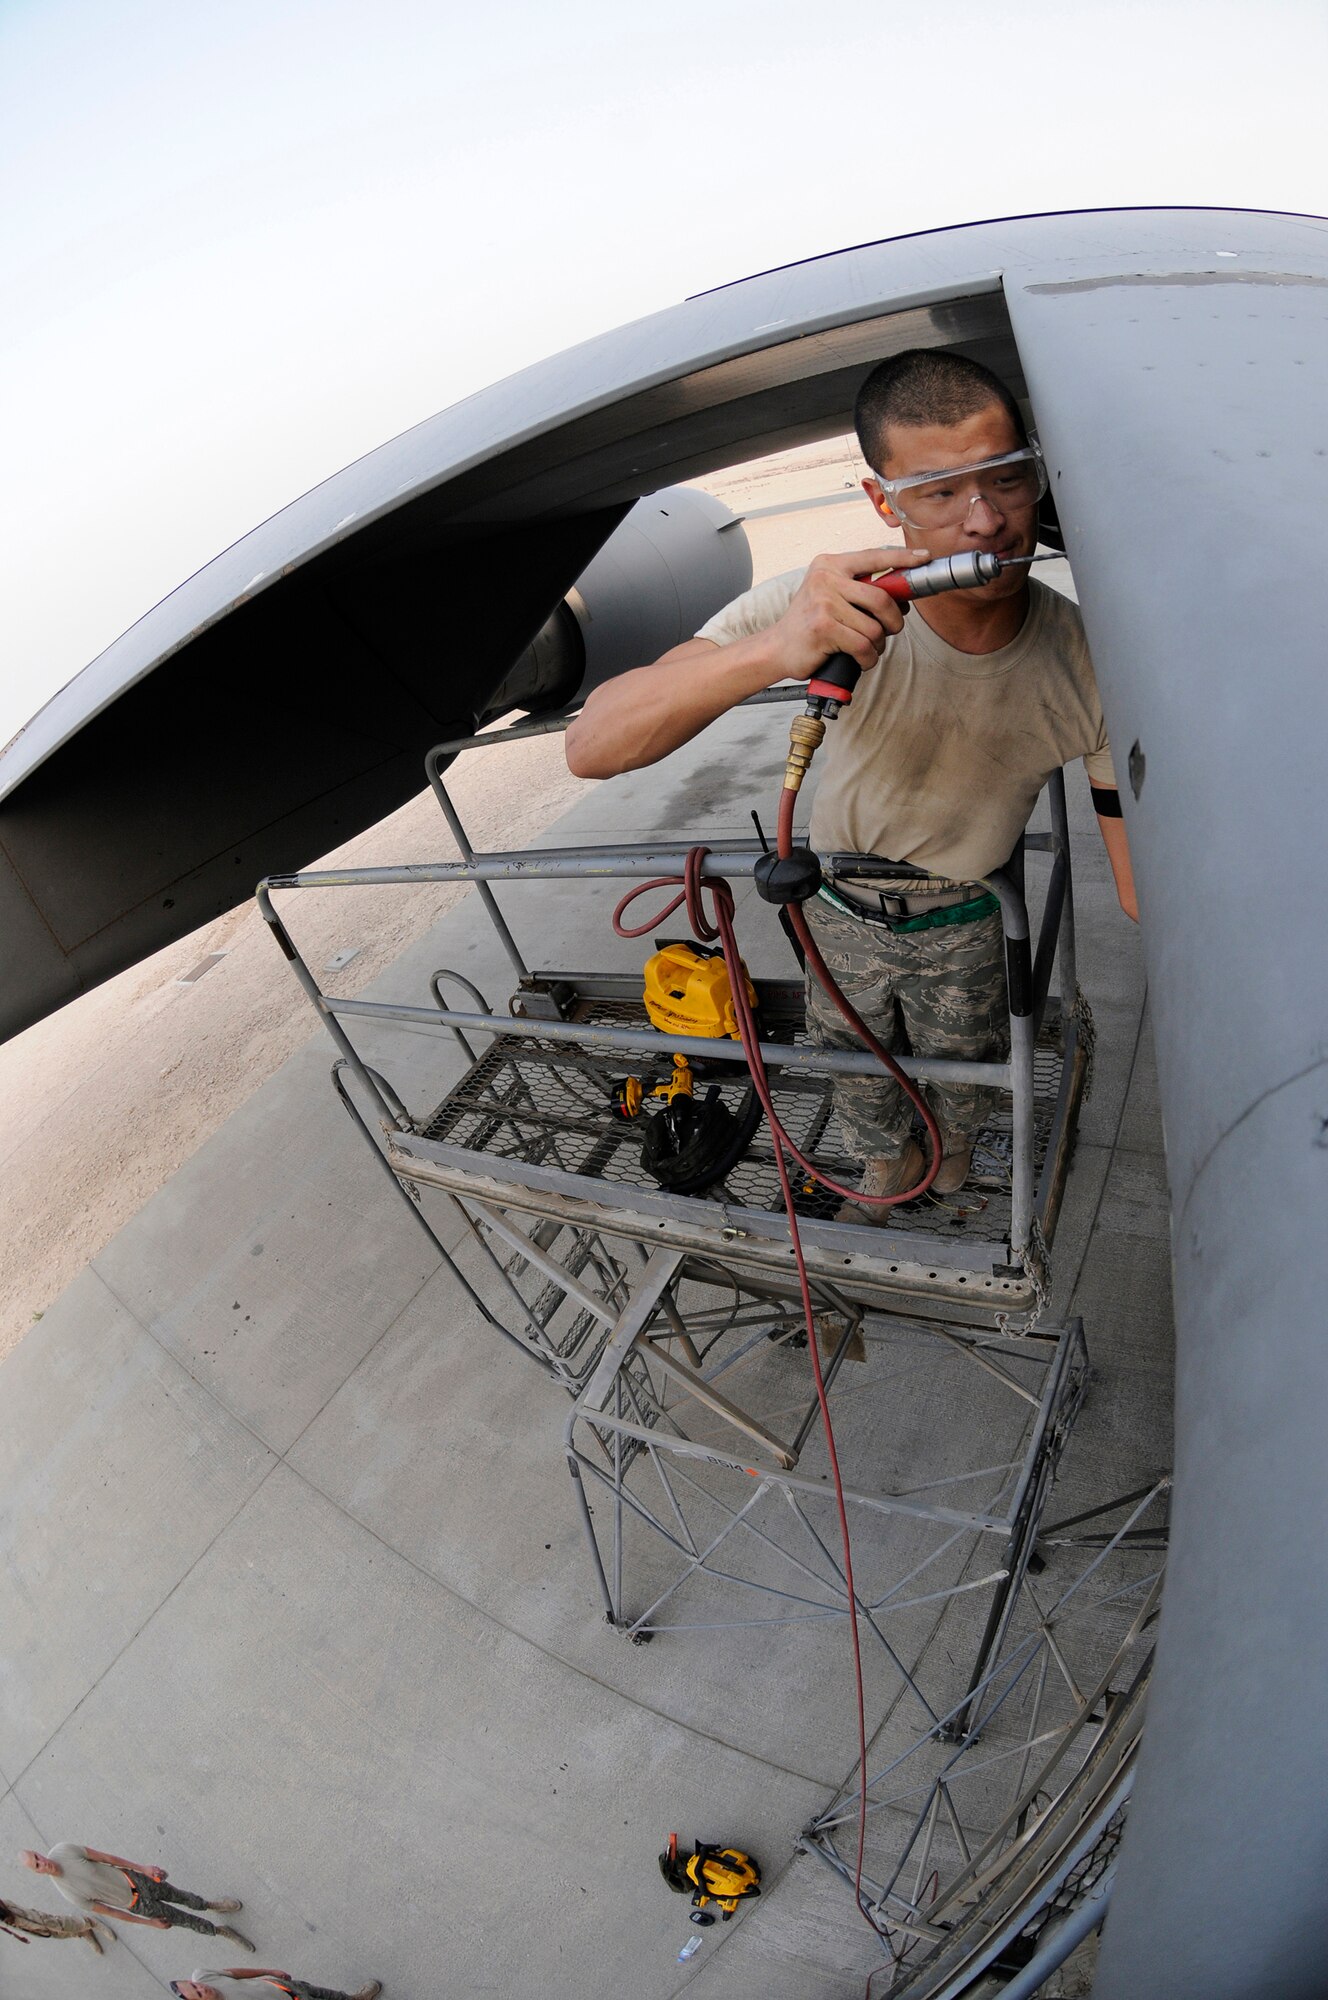 Airman 1st Class Matthew Enter, 379th Expeditionary Maintenance Squadron, works high on a maintenance stand drilling out a stripped screw head, October 17, 2008, at an undisclosed air base in Southwest Asia.  The bad screws are being removed so the crew chiefs can pull the panel and do maintenance on a C-17 Globemaster III.  Airman Enter, a native of Rochester, N.Y., is deployed from Fairchild Air Force Base, Wash., in support of Operations Iraqi and Enduring Freedom and Joint Task Force-Horn of Africa.  (U.S. Air Force photo by Tech. Sgt. Michael Boquette/Released)